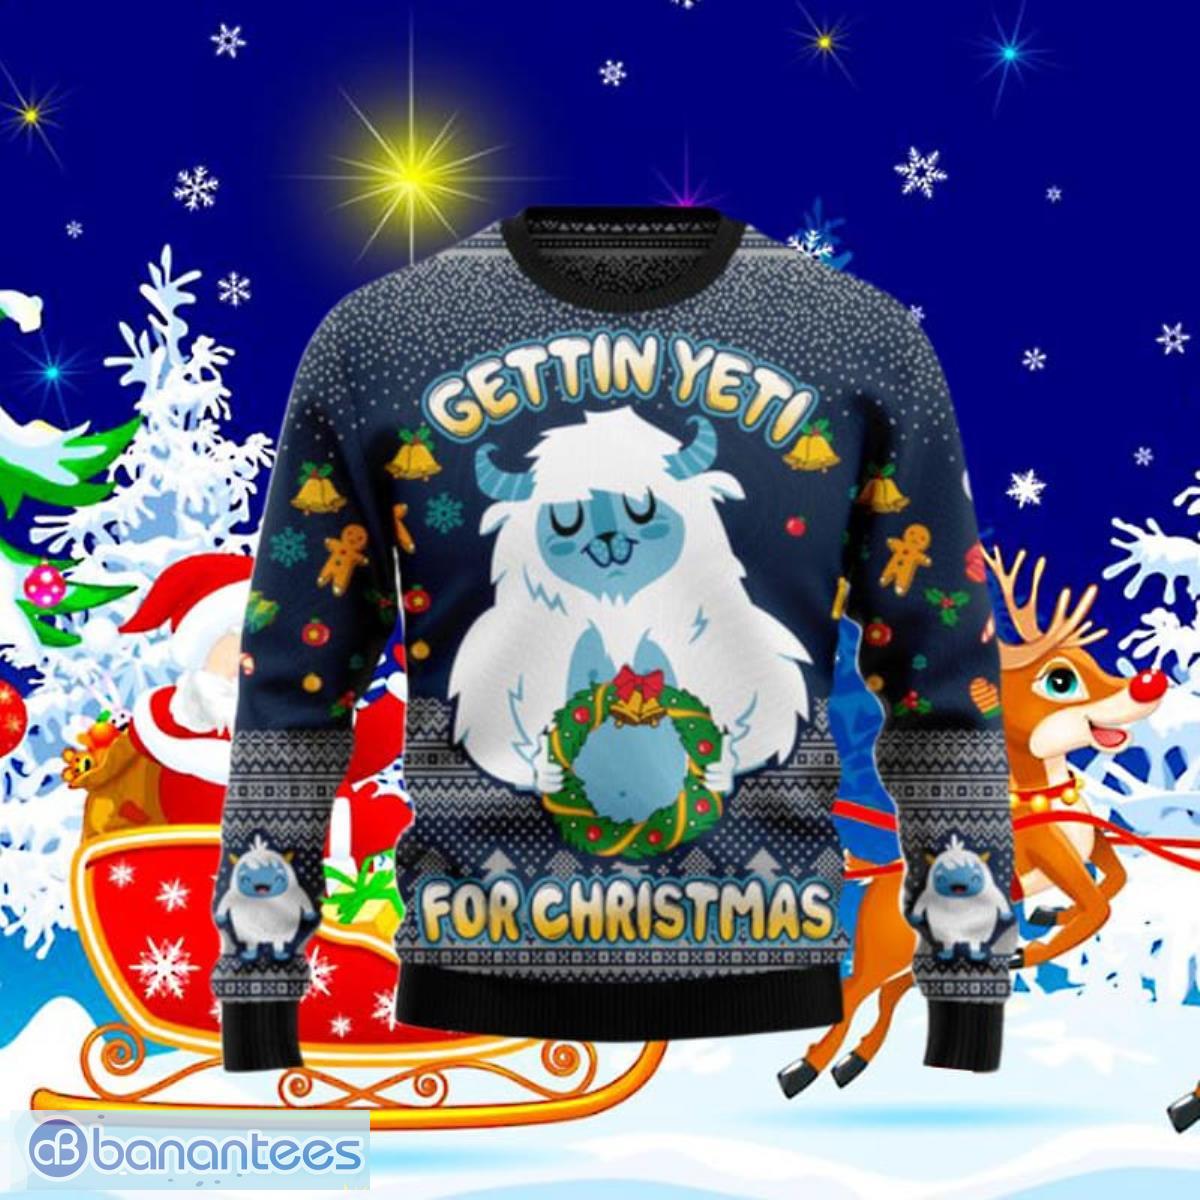 https://image.banantees.com/2023/11/gettin-yeti-for-christmas-ugly-christmas-sweaters-unique-gift-for-men-and-women.jpg